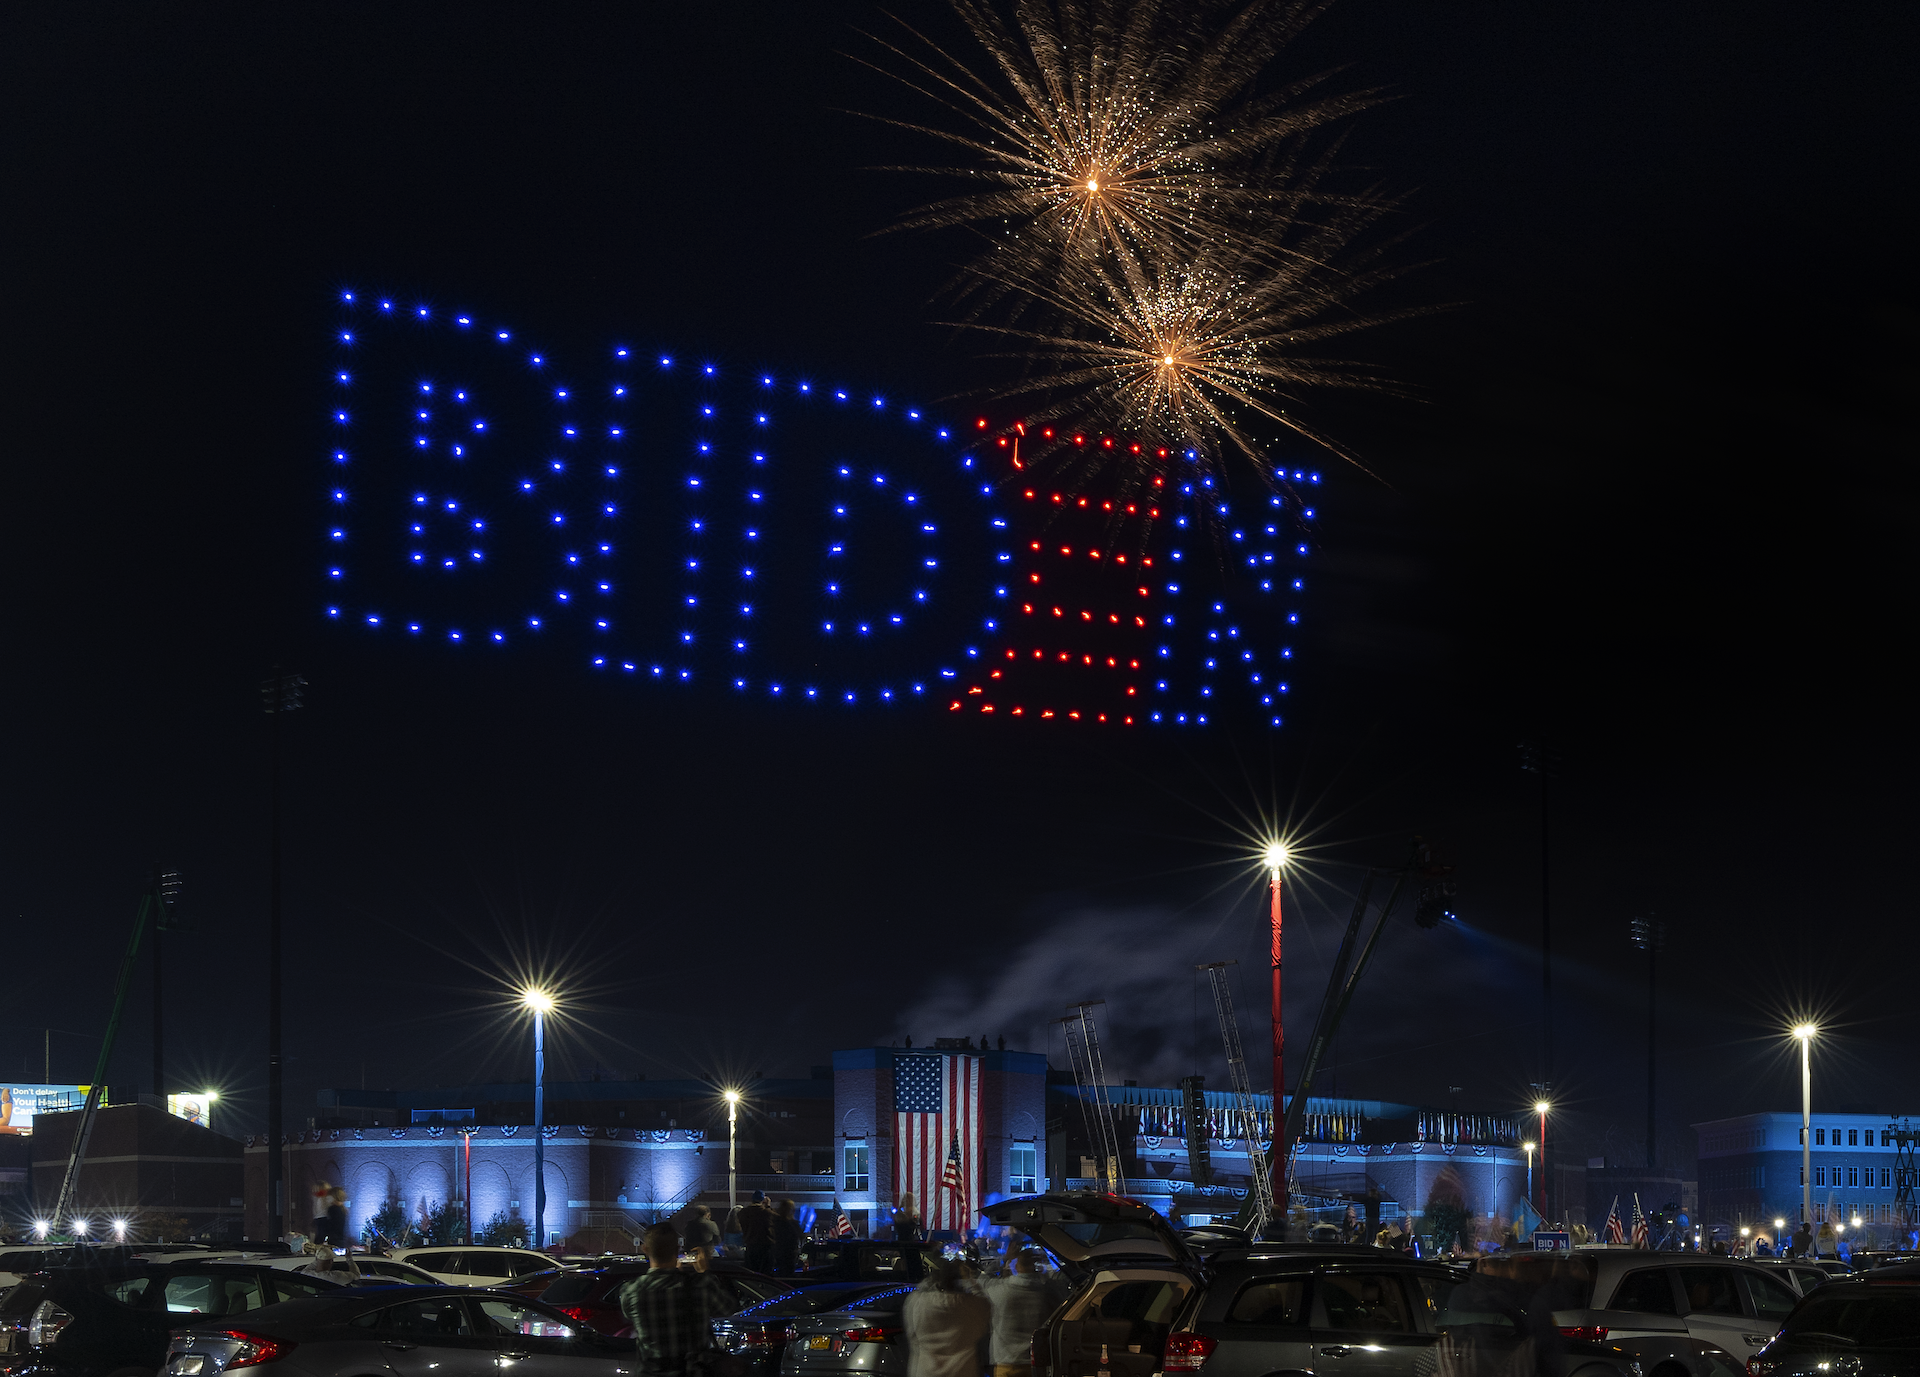 In November 2020, Verge Aero and Strictly FX flew one of the biggest drone light shows in the world, President-Elect Biden's victory speech.